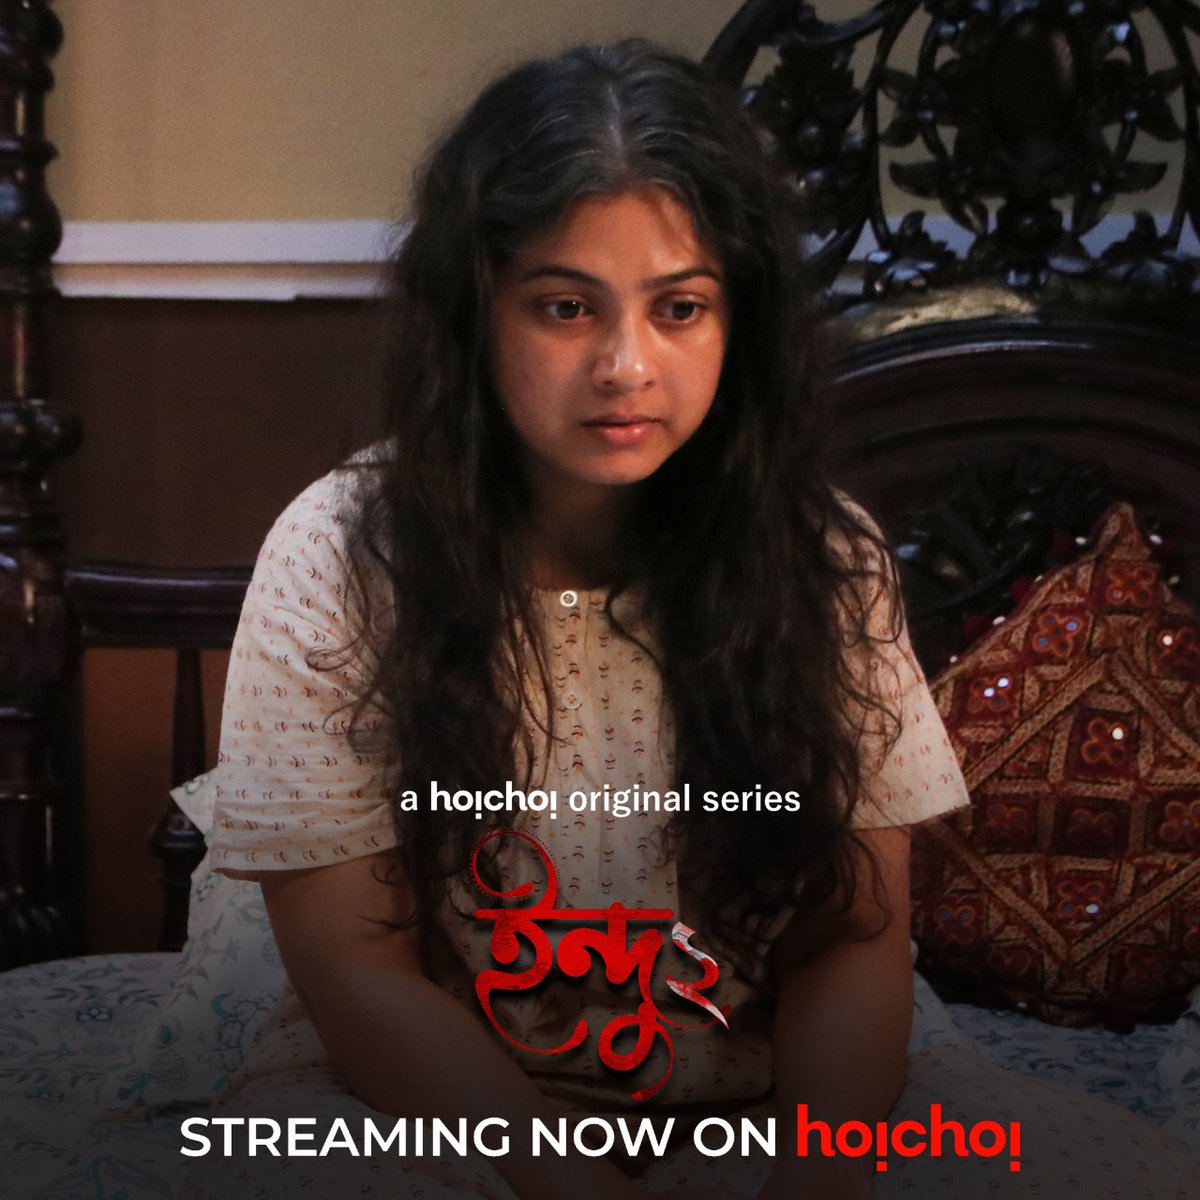 INDU 2 is Streaming Now only on Hoichoi 😀 

#Indu2 @hoichoitv